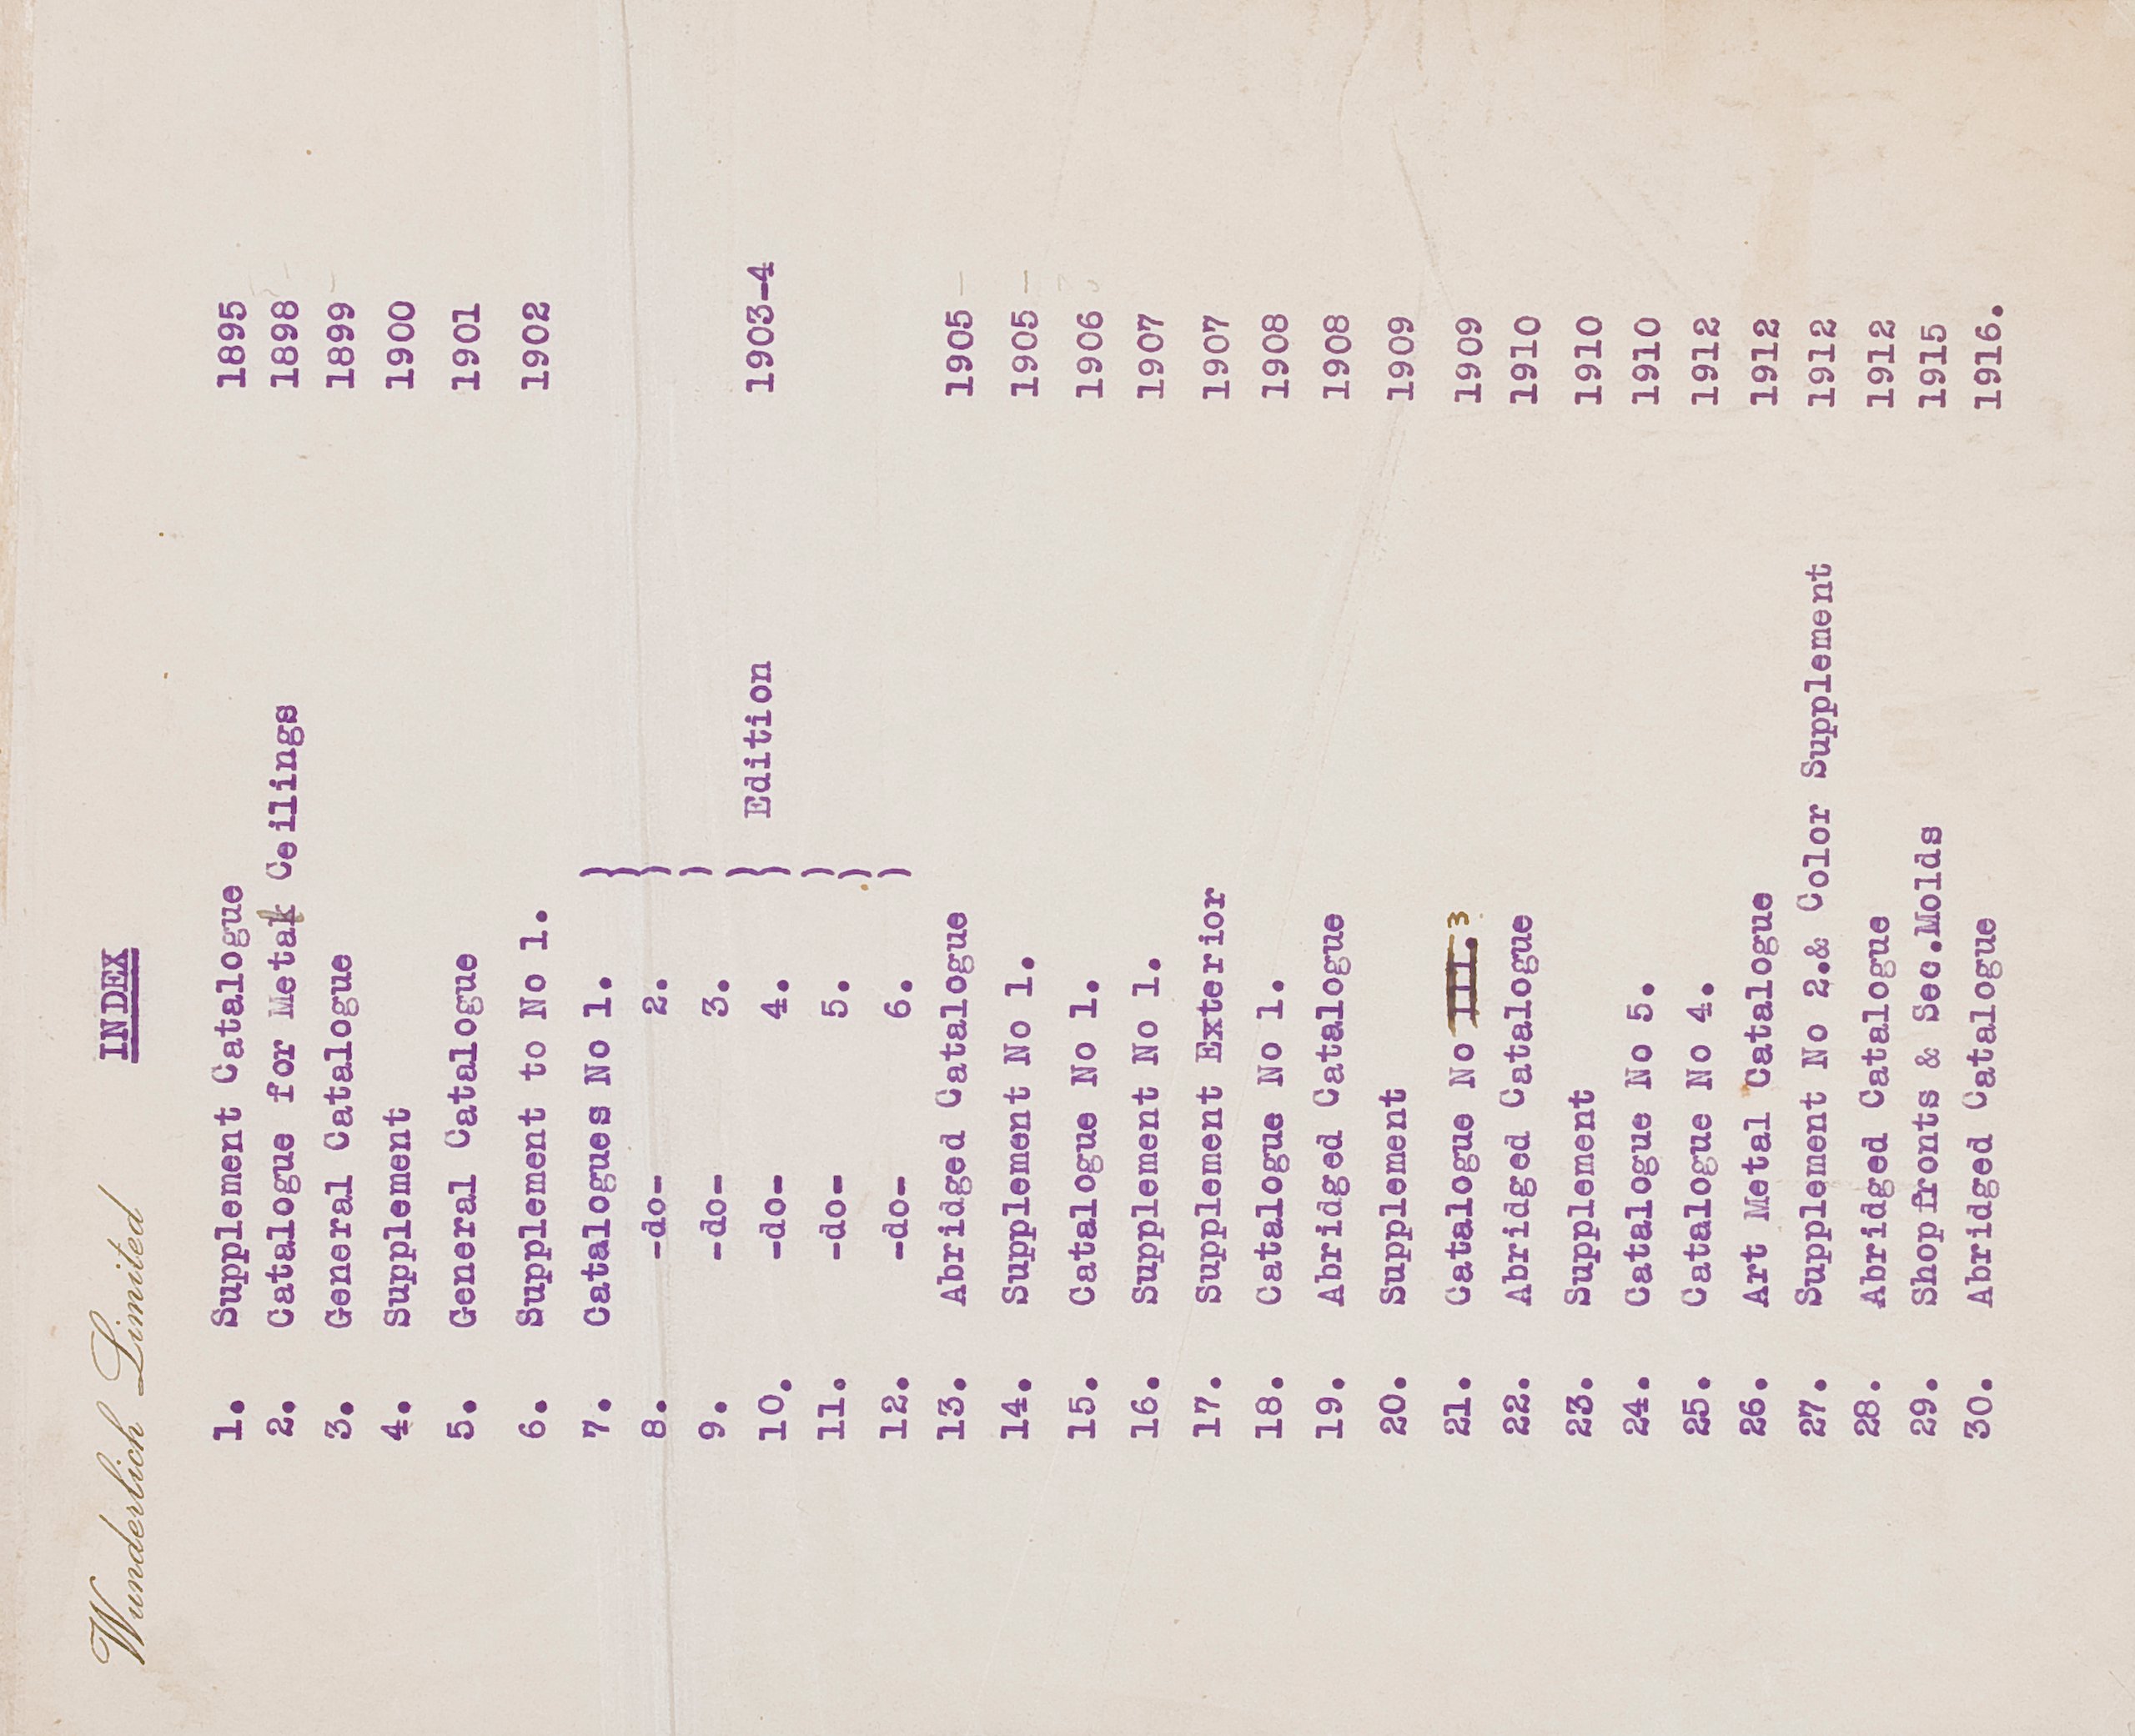 Index page from Wunderlich catalogue 'Patent Embossed Zinc Ceilings'